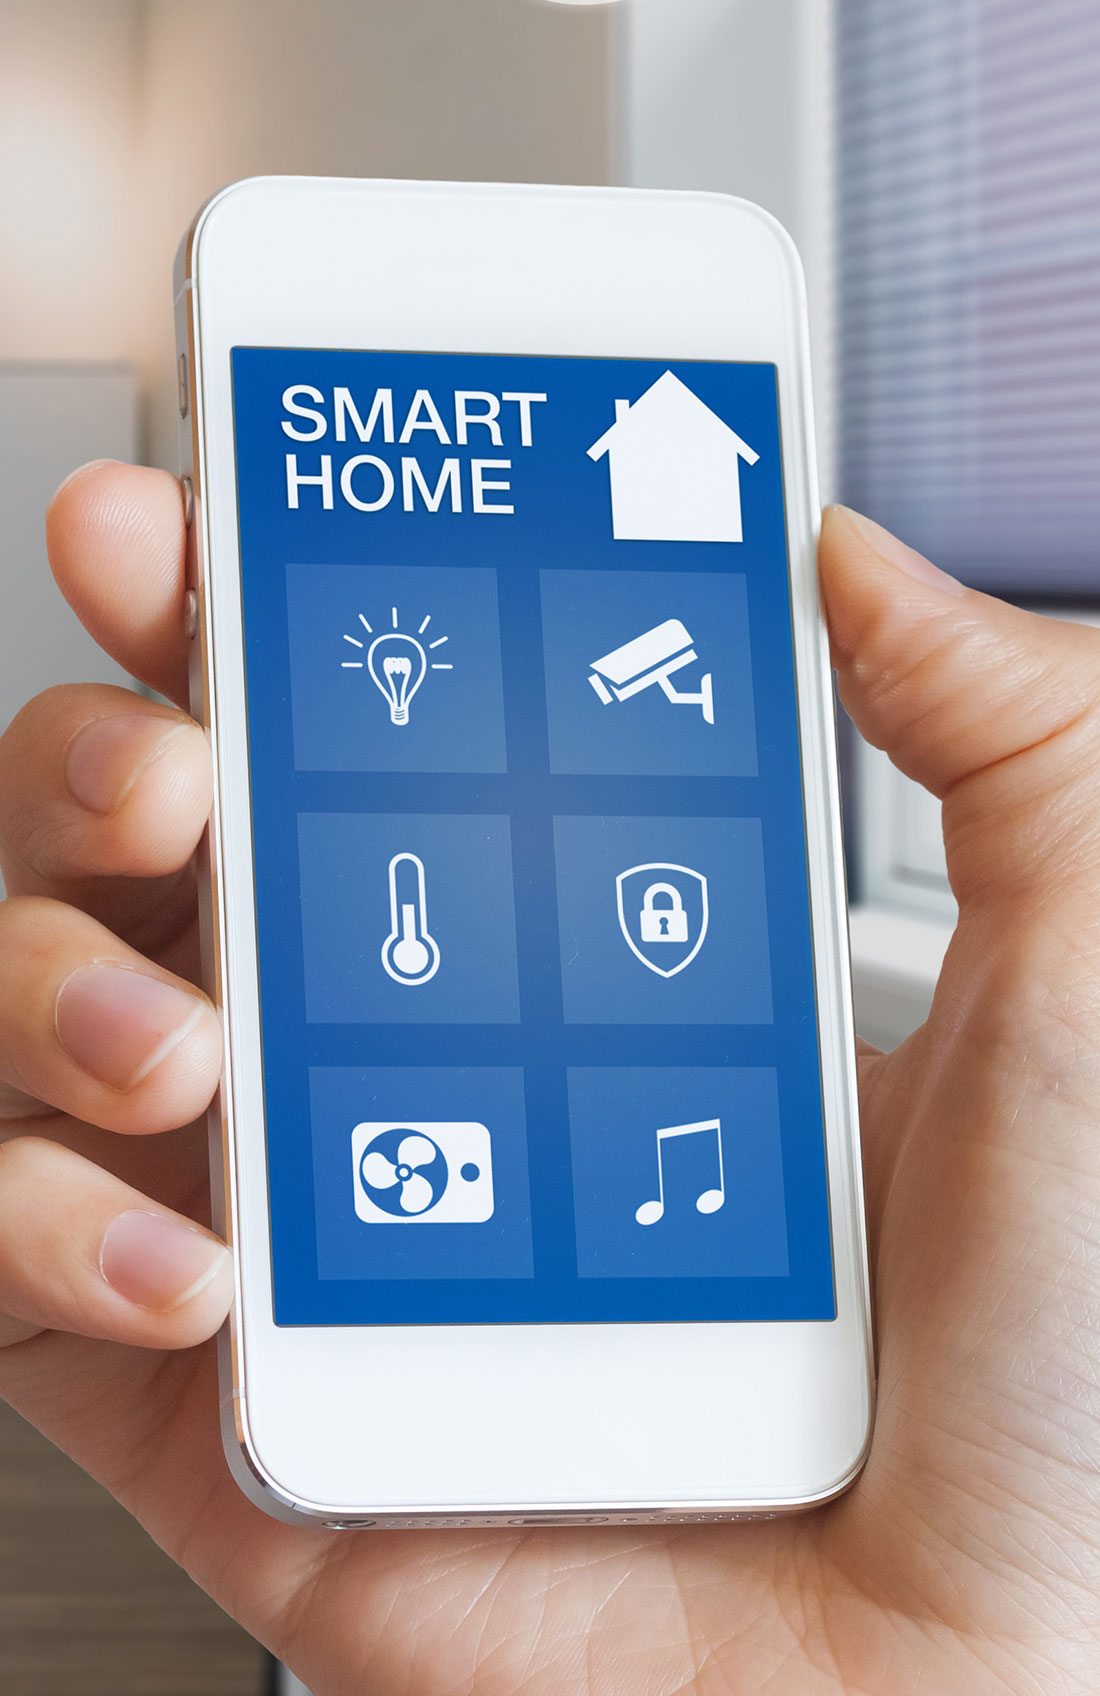 Smart home interface